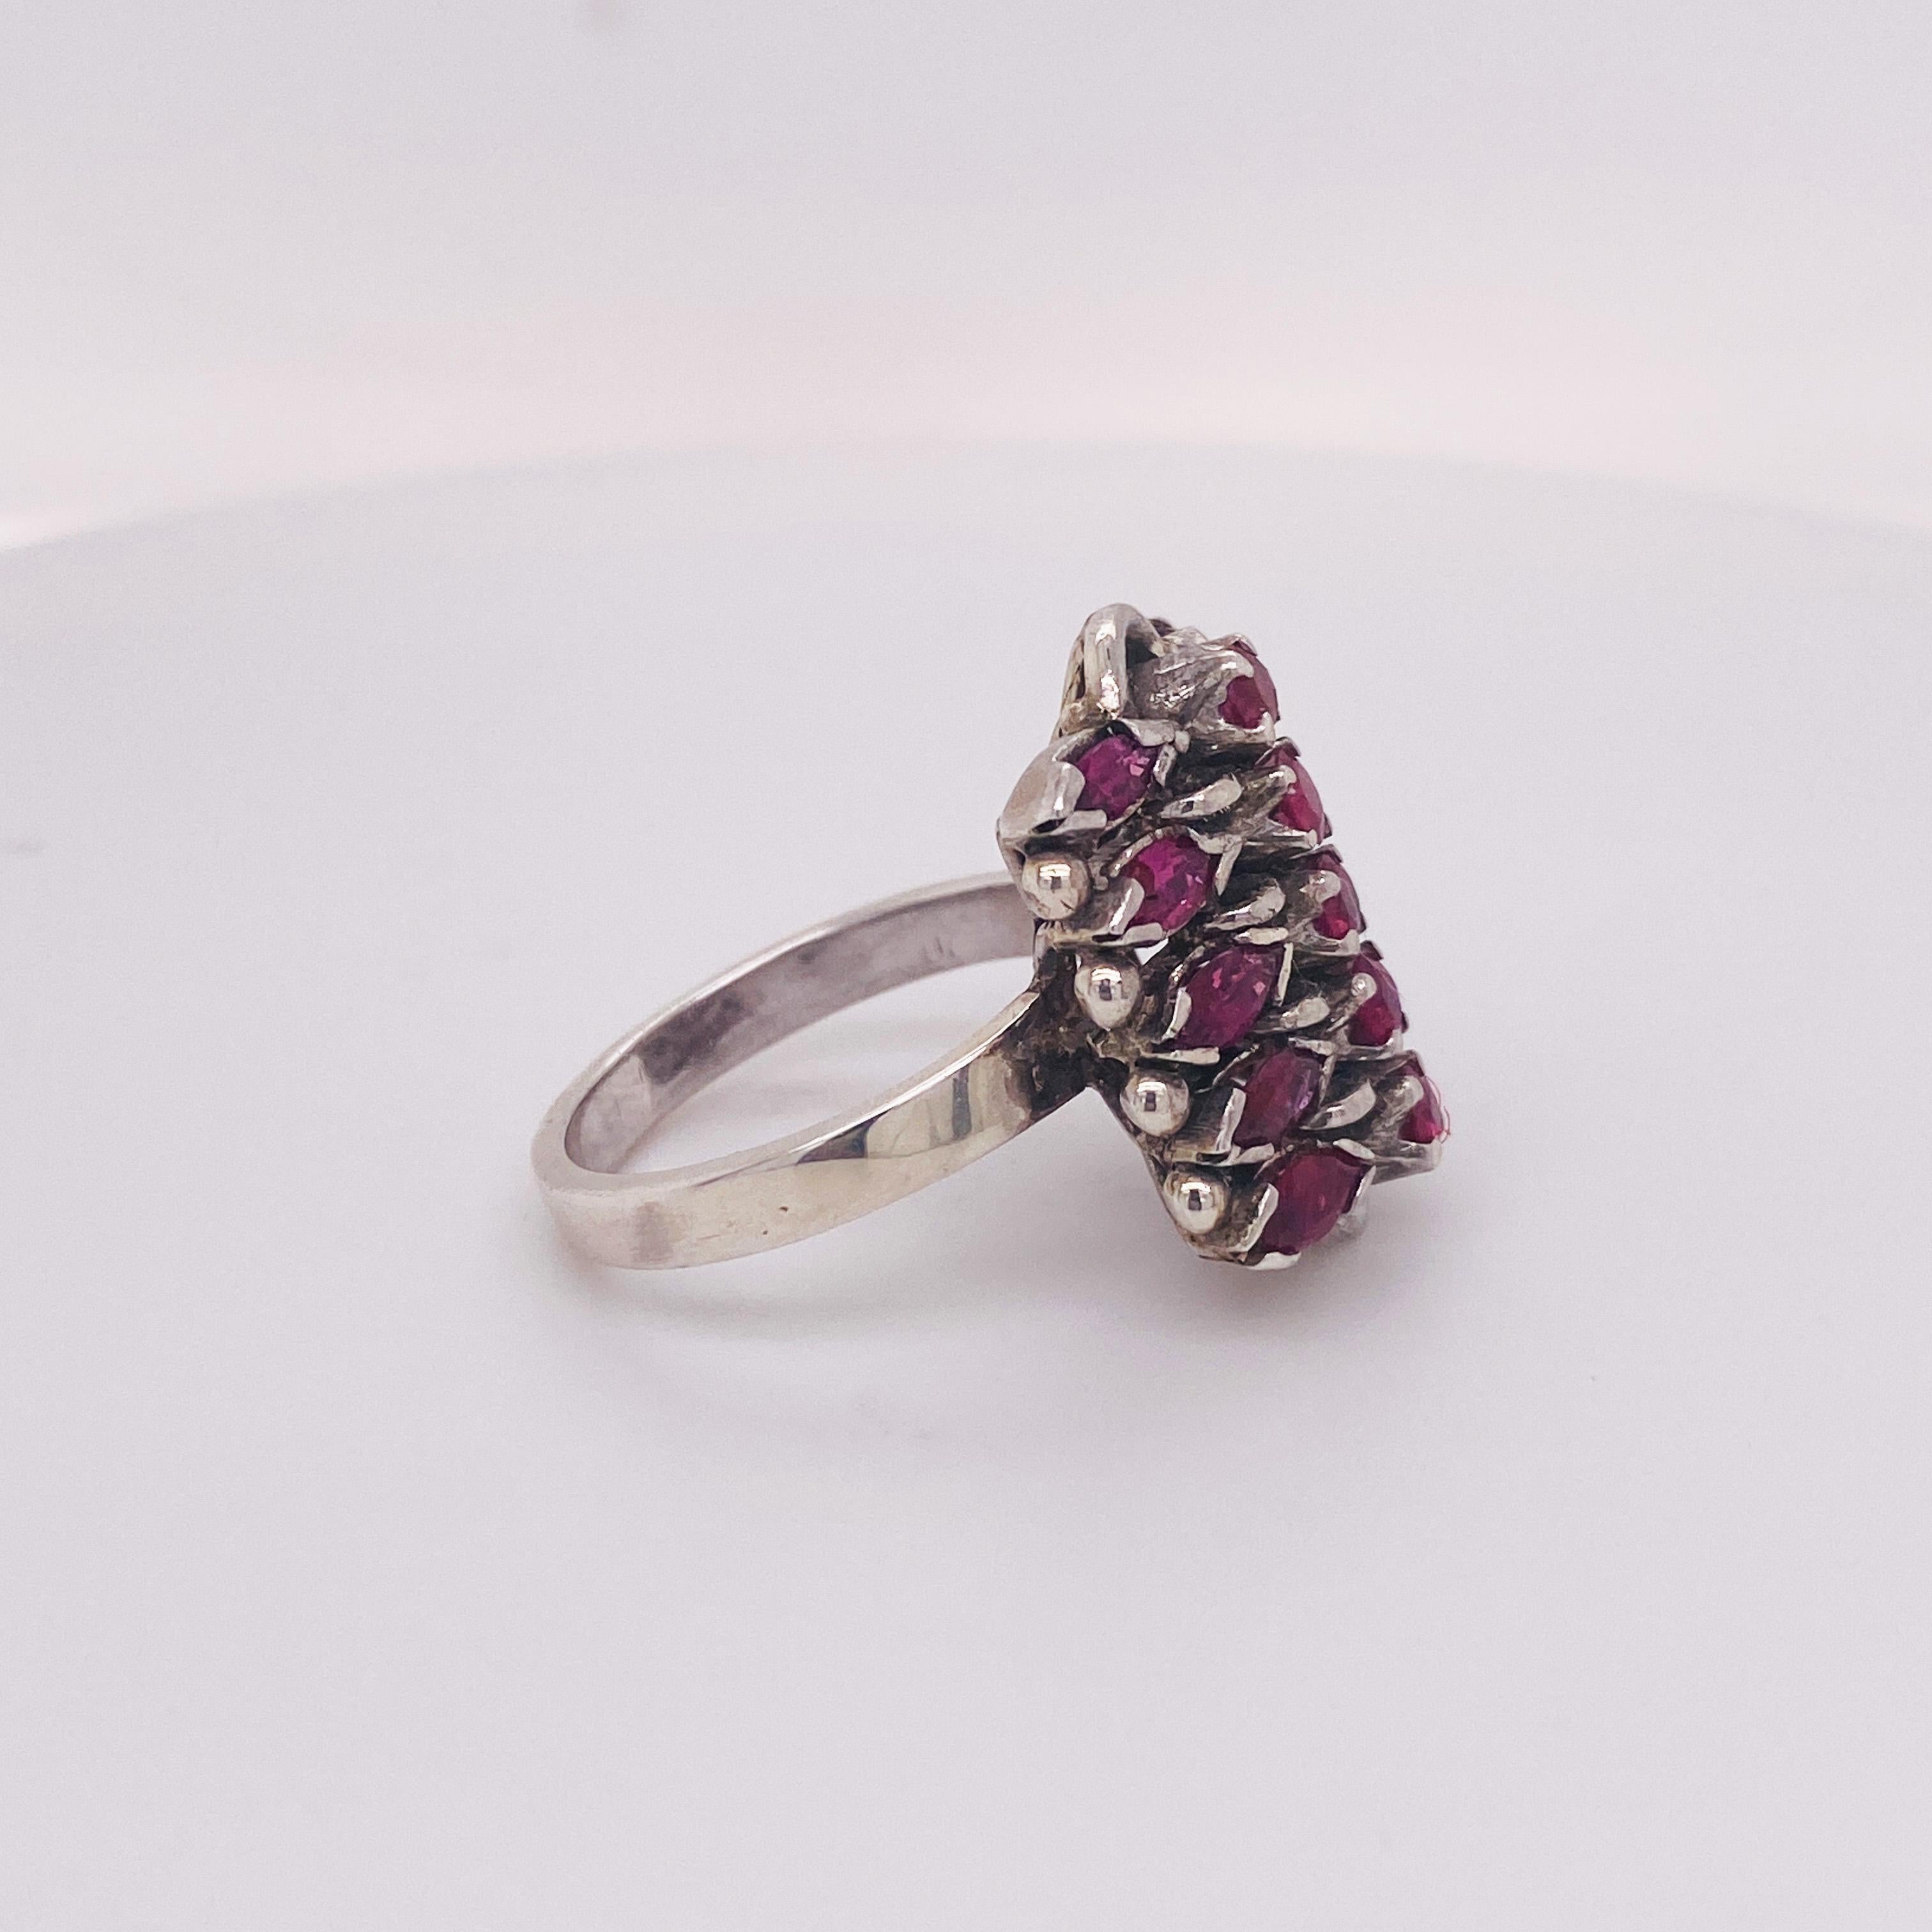 This genuine 1 carat ruby gemstone ring is vibrant in color and character! The design is a unique cluster made of bold ruby gemstones of different shapes - marquise and round. The bright ruby red is set in sterling silver. This is quite a special